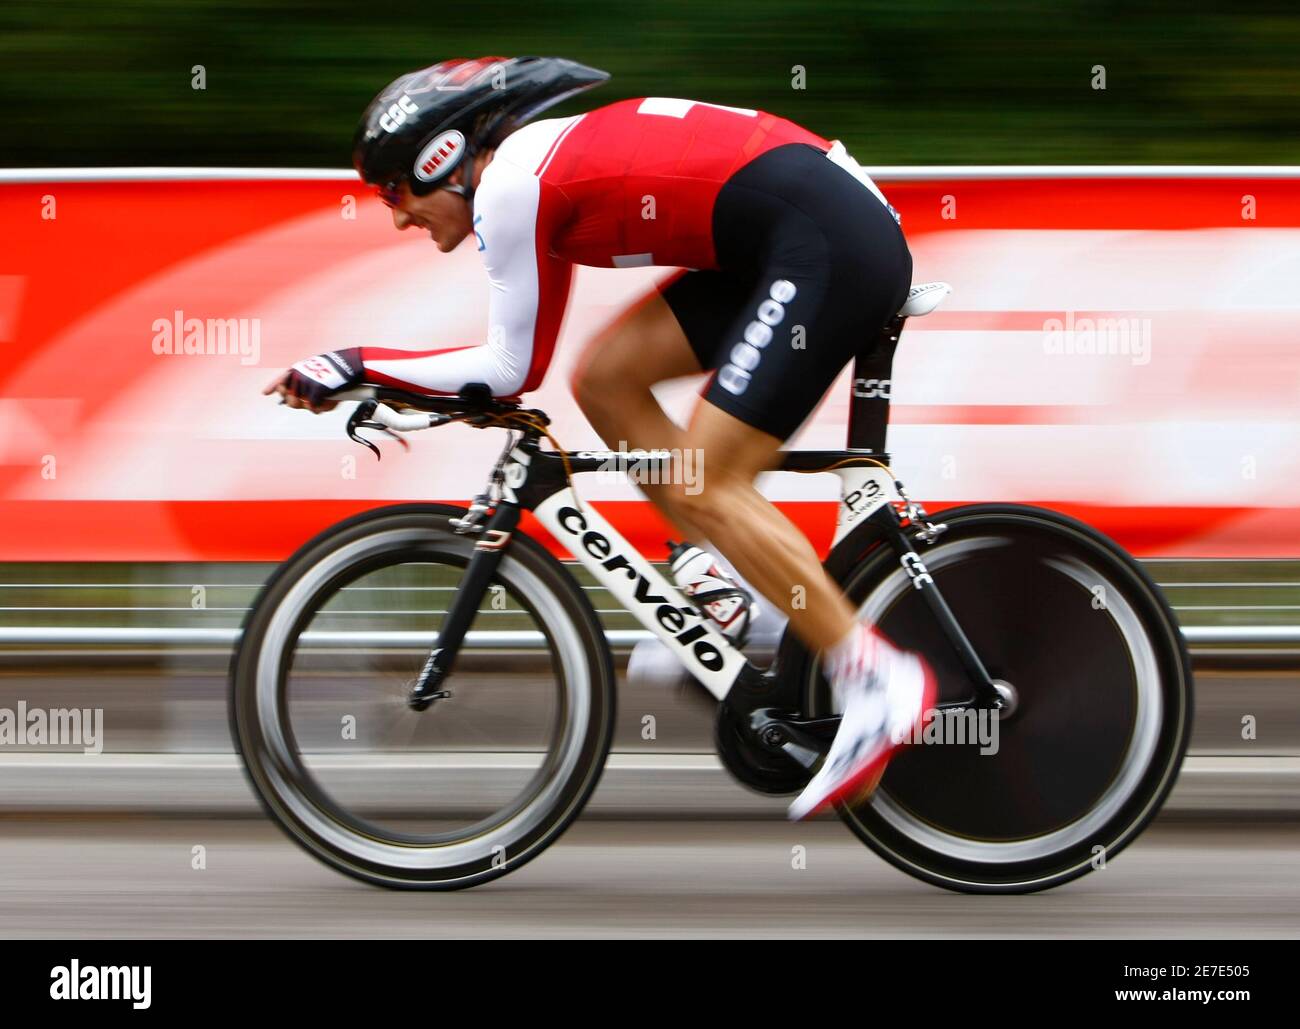 Defending time trial world champion Fabian Cancellara of Switzerland speeds to win the men's elite time trial race at the UCI Road Cycling World Championships in Stuttgart September 27, 2007. REUTERS/Wolfgang (